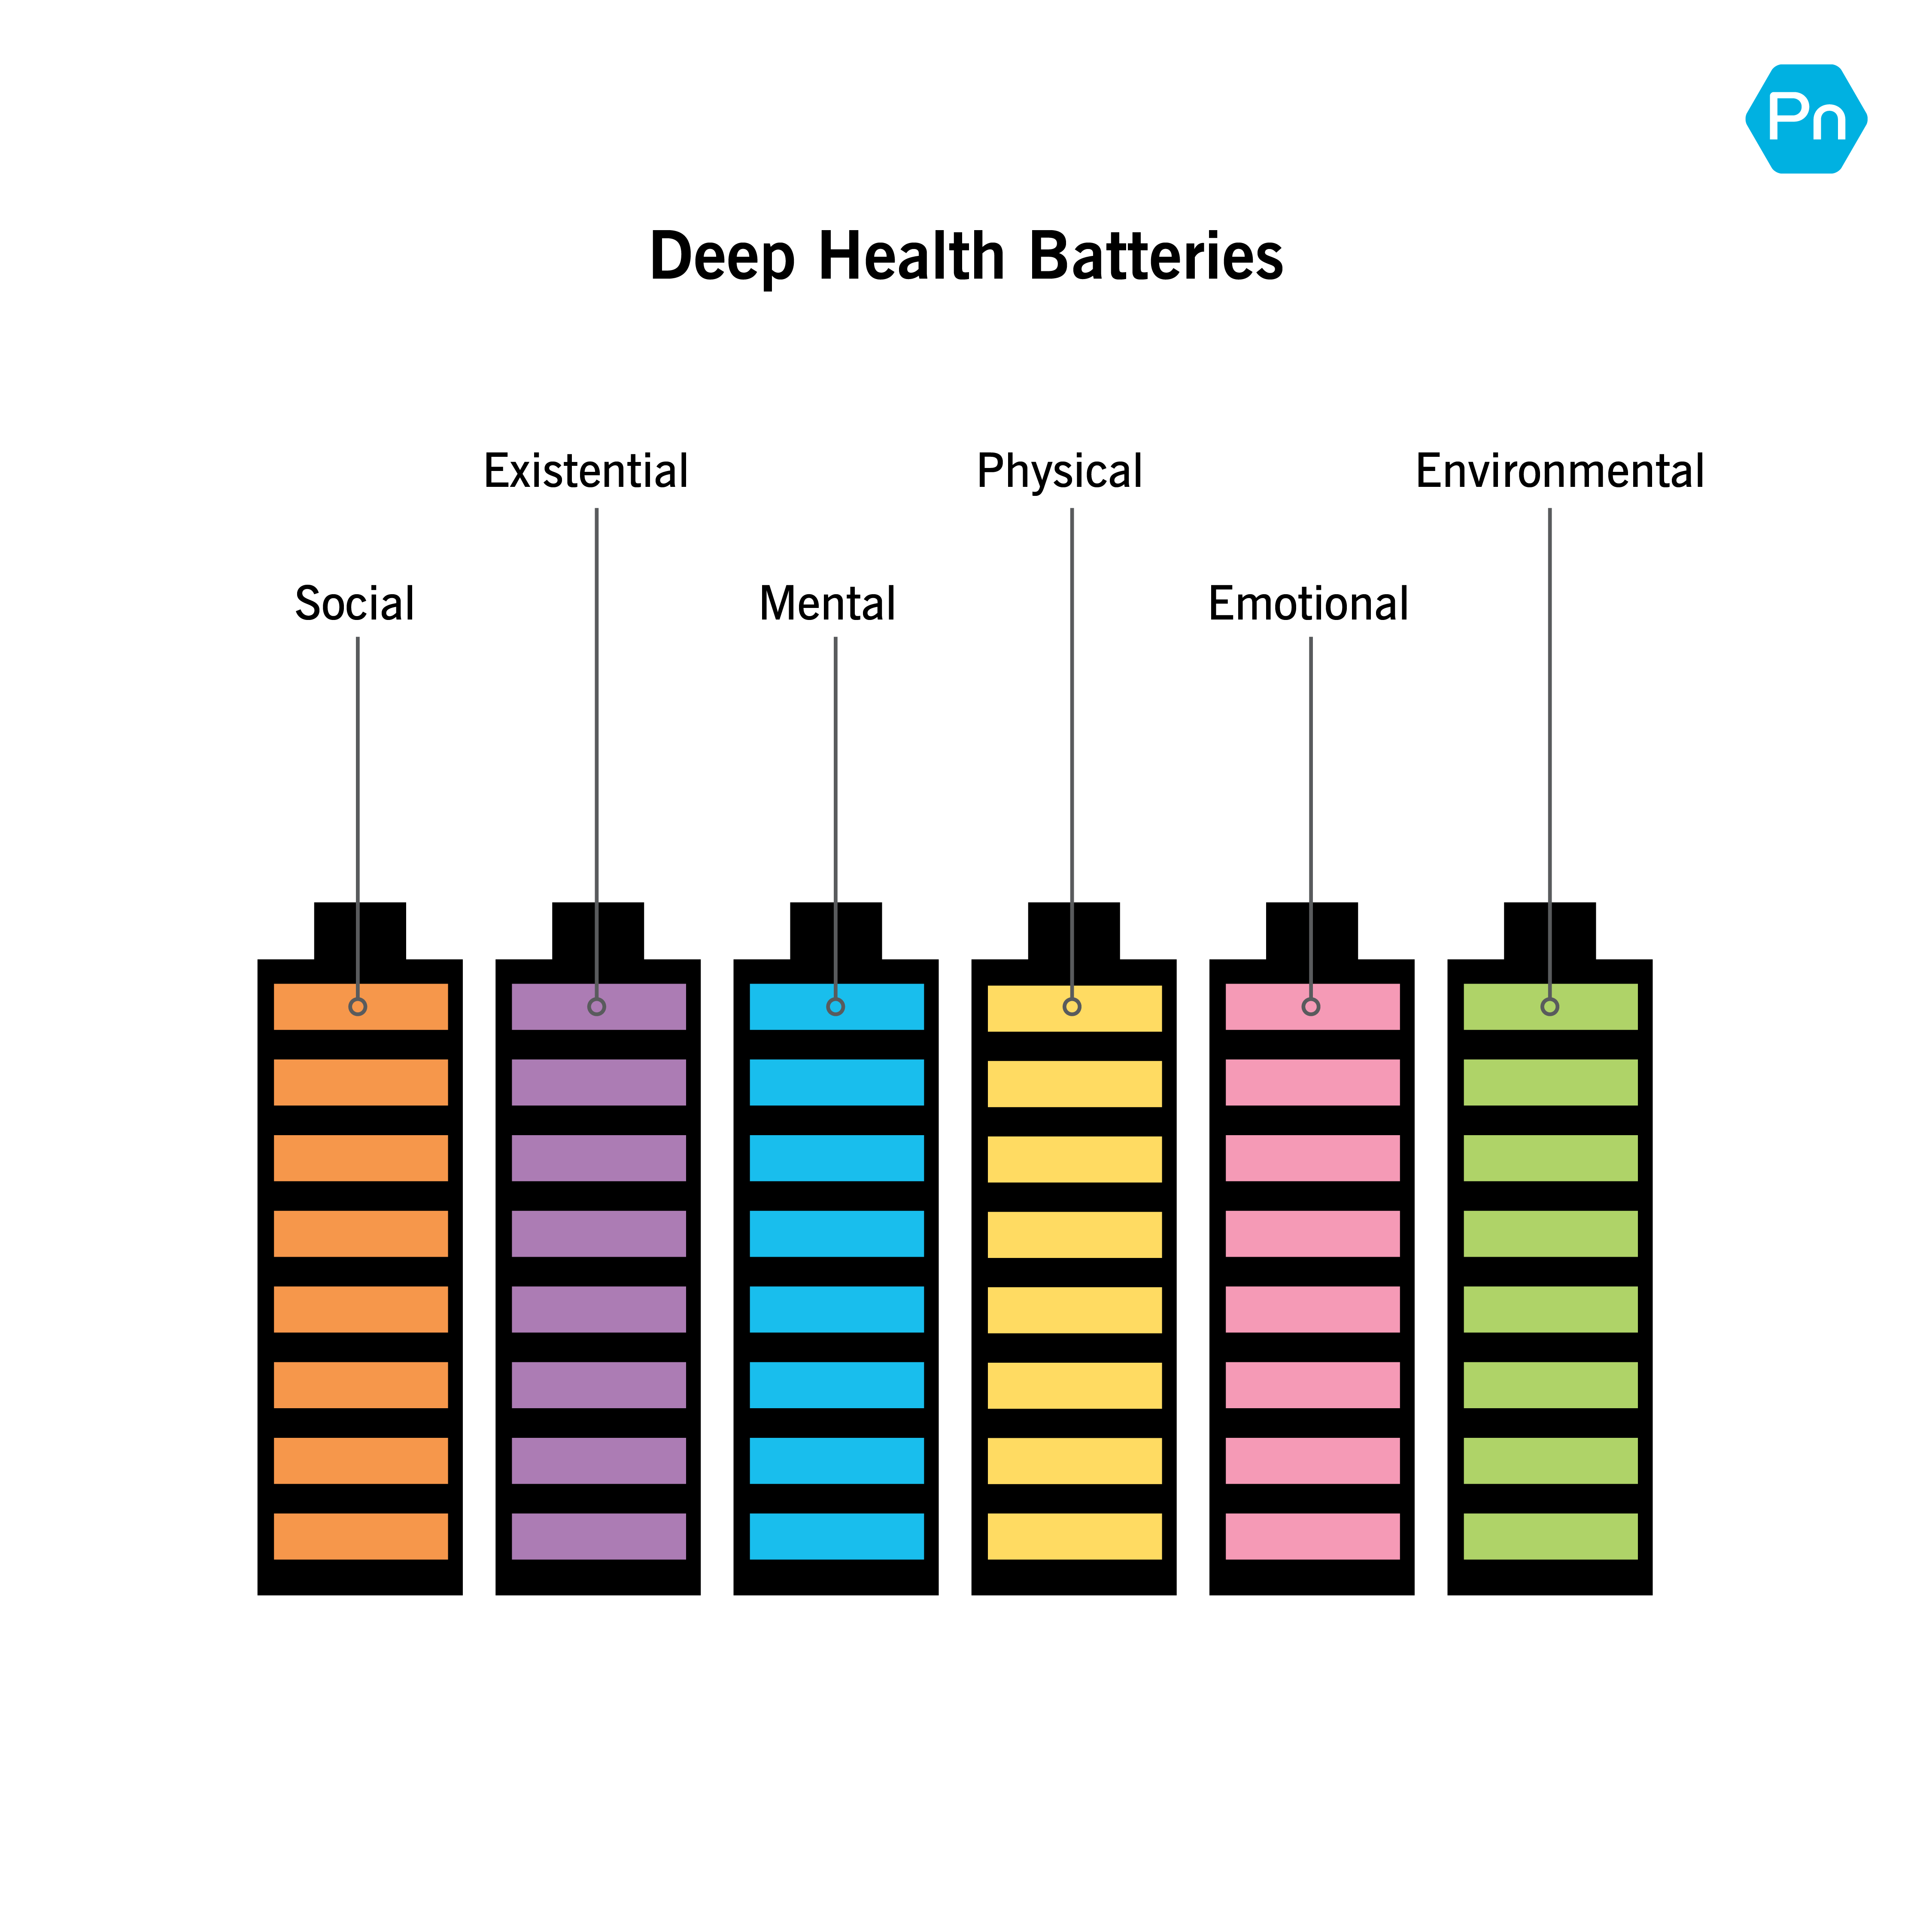 Graphic depiction of six deep health dimensions shown as batteries: Social, Existential, Mental, Physical, Emotional, and Environmental